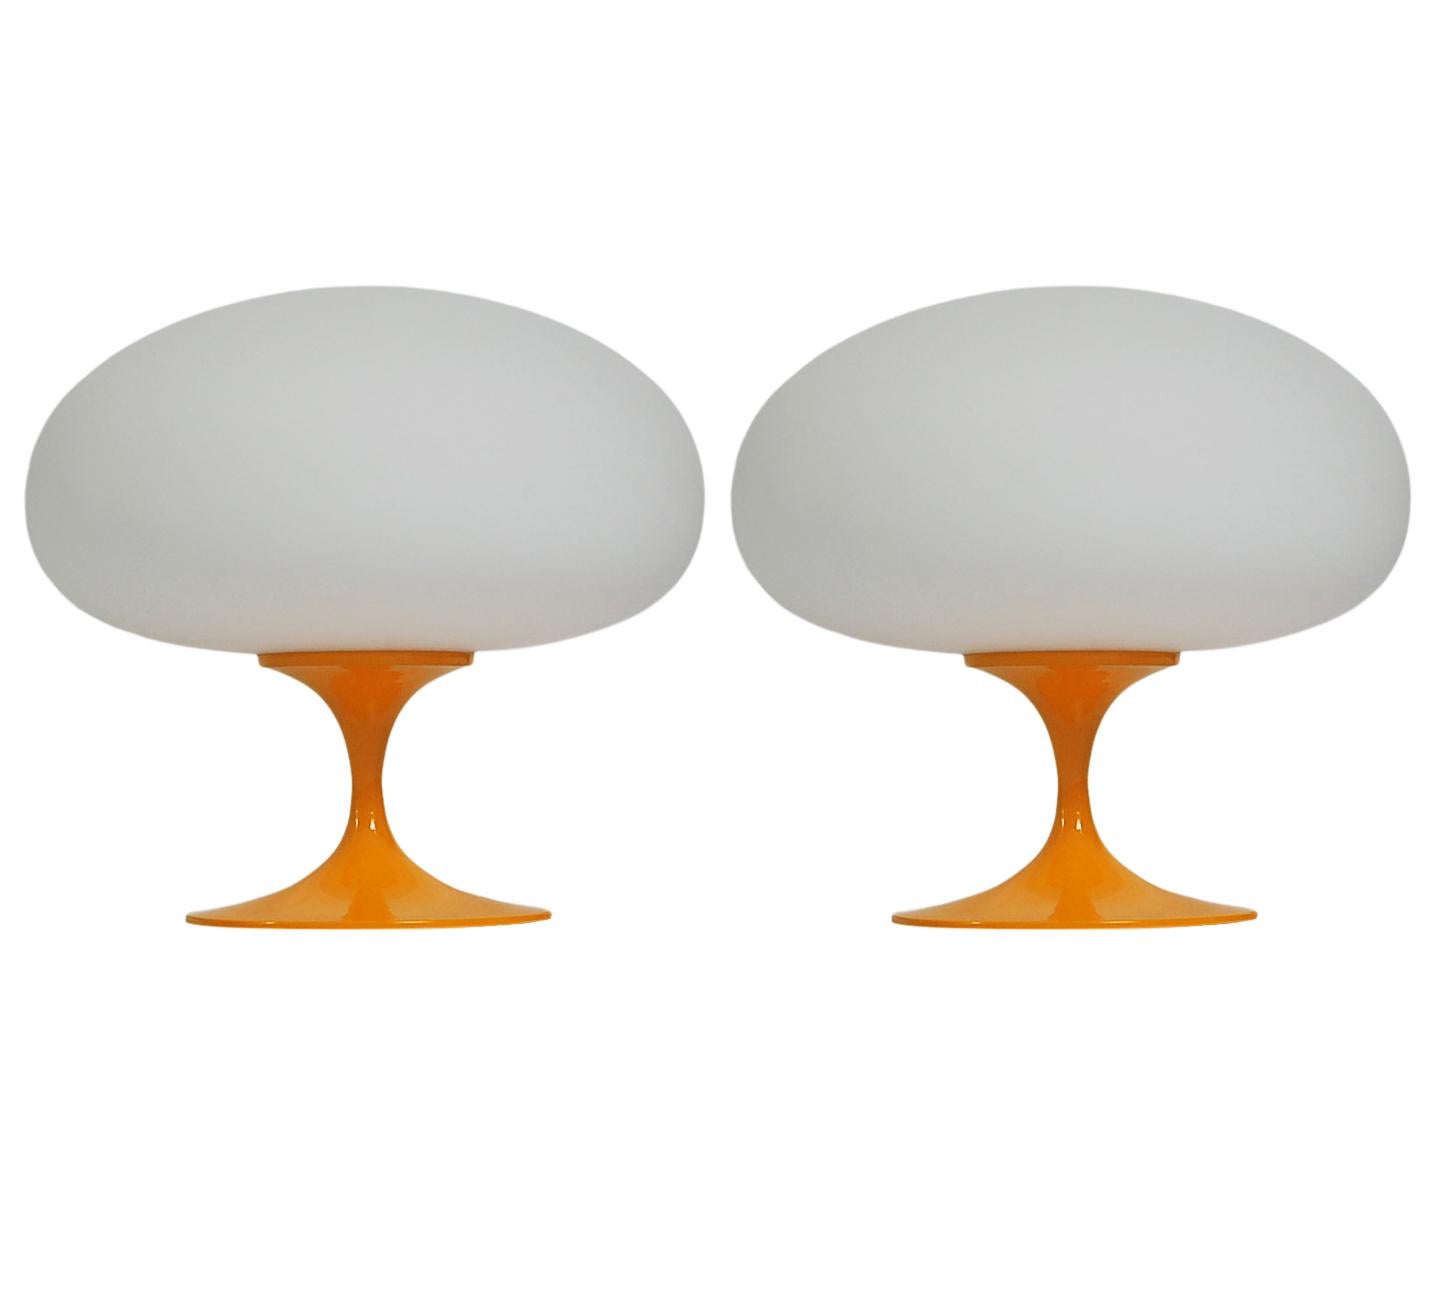 Indian Pair of Mid-Century Tulip Table Lamps by Designline in Orange on White Glass For Sale